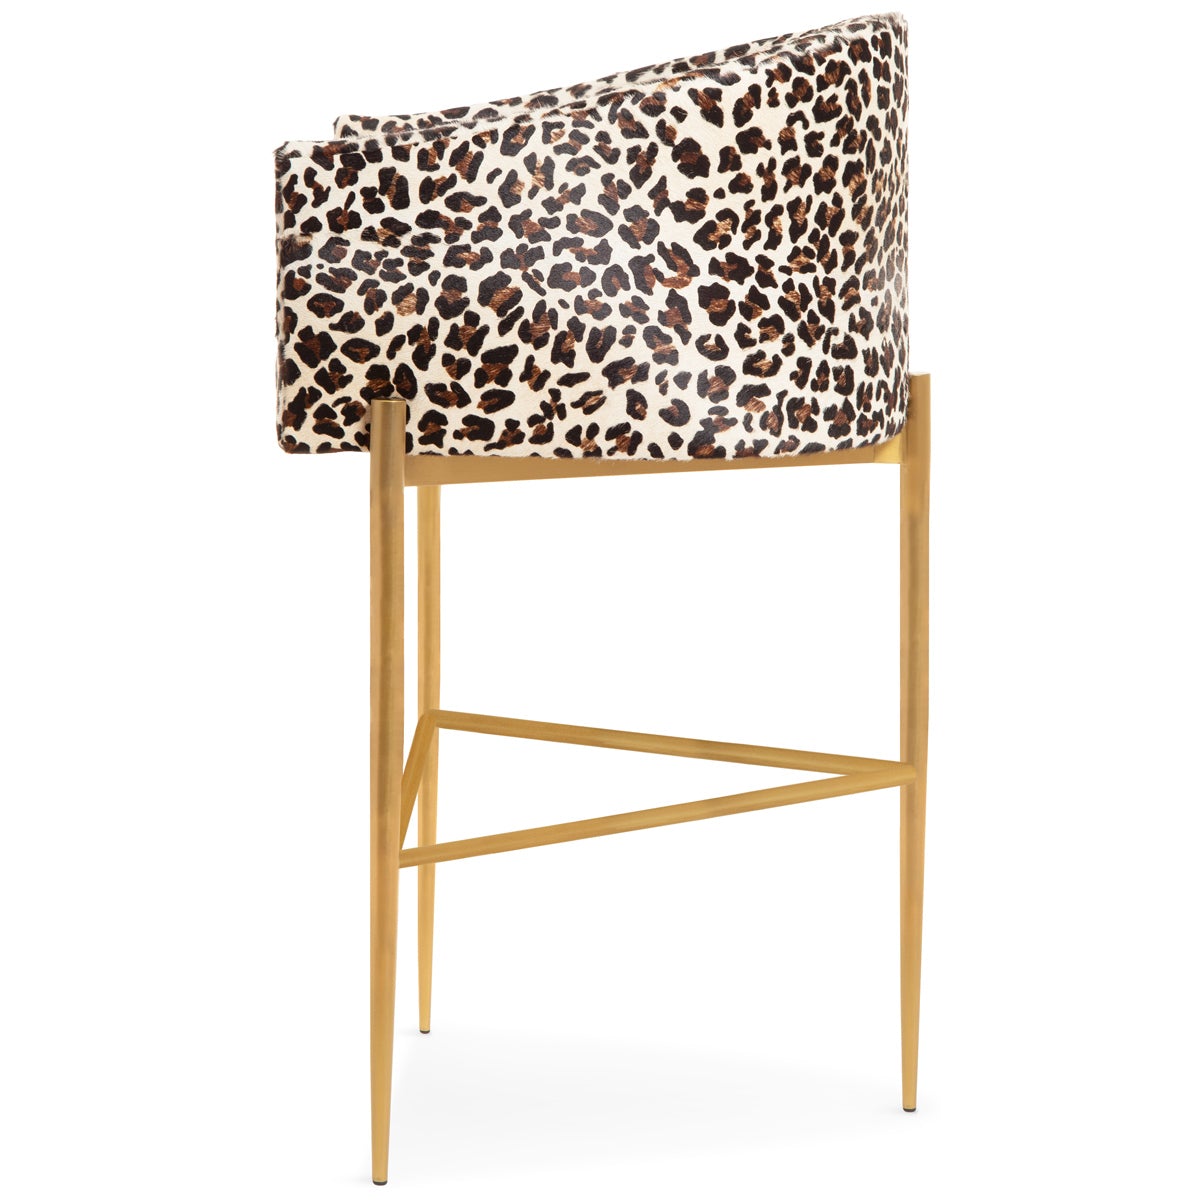 Art Deco Bar and Counter Stool in Leopard Print Cowhide - ModShop1.com